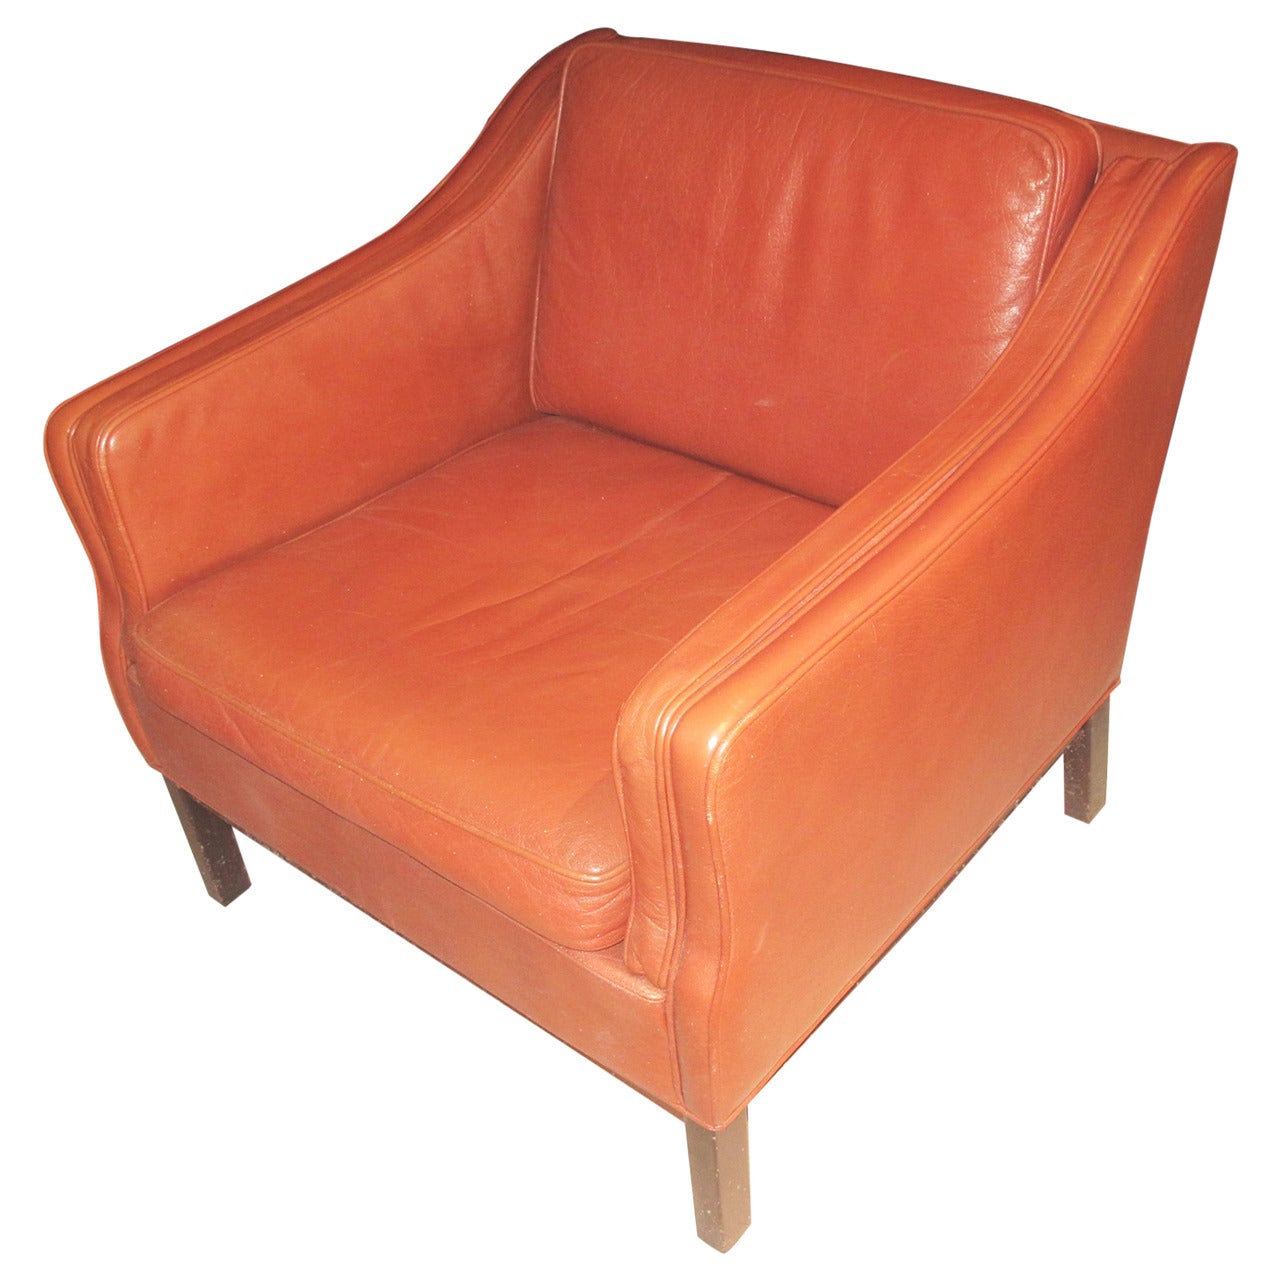 Large-Scale Danish Leather Upholstered Club Chair